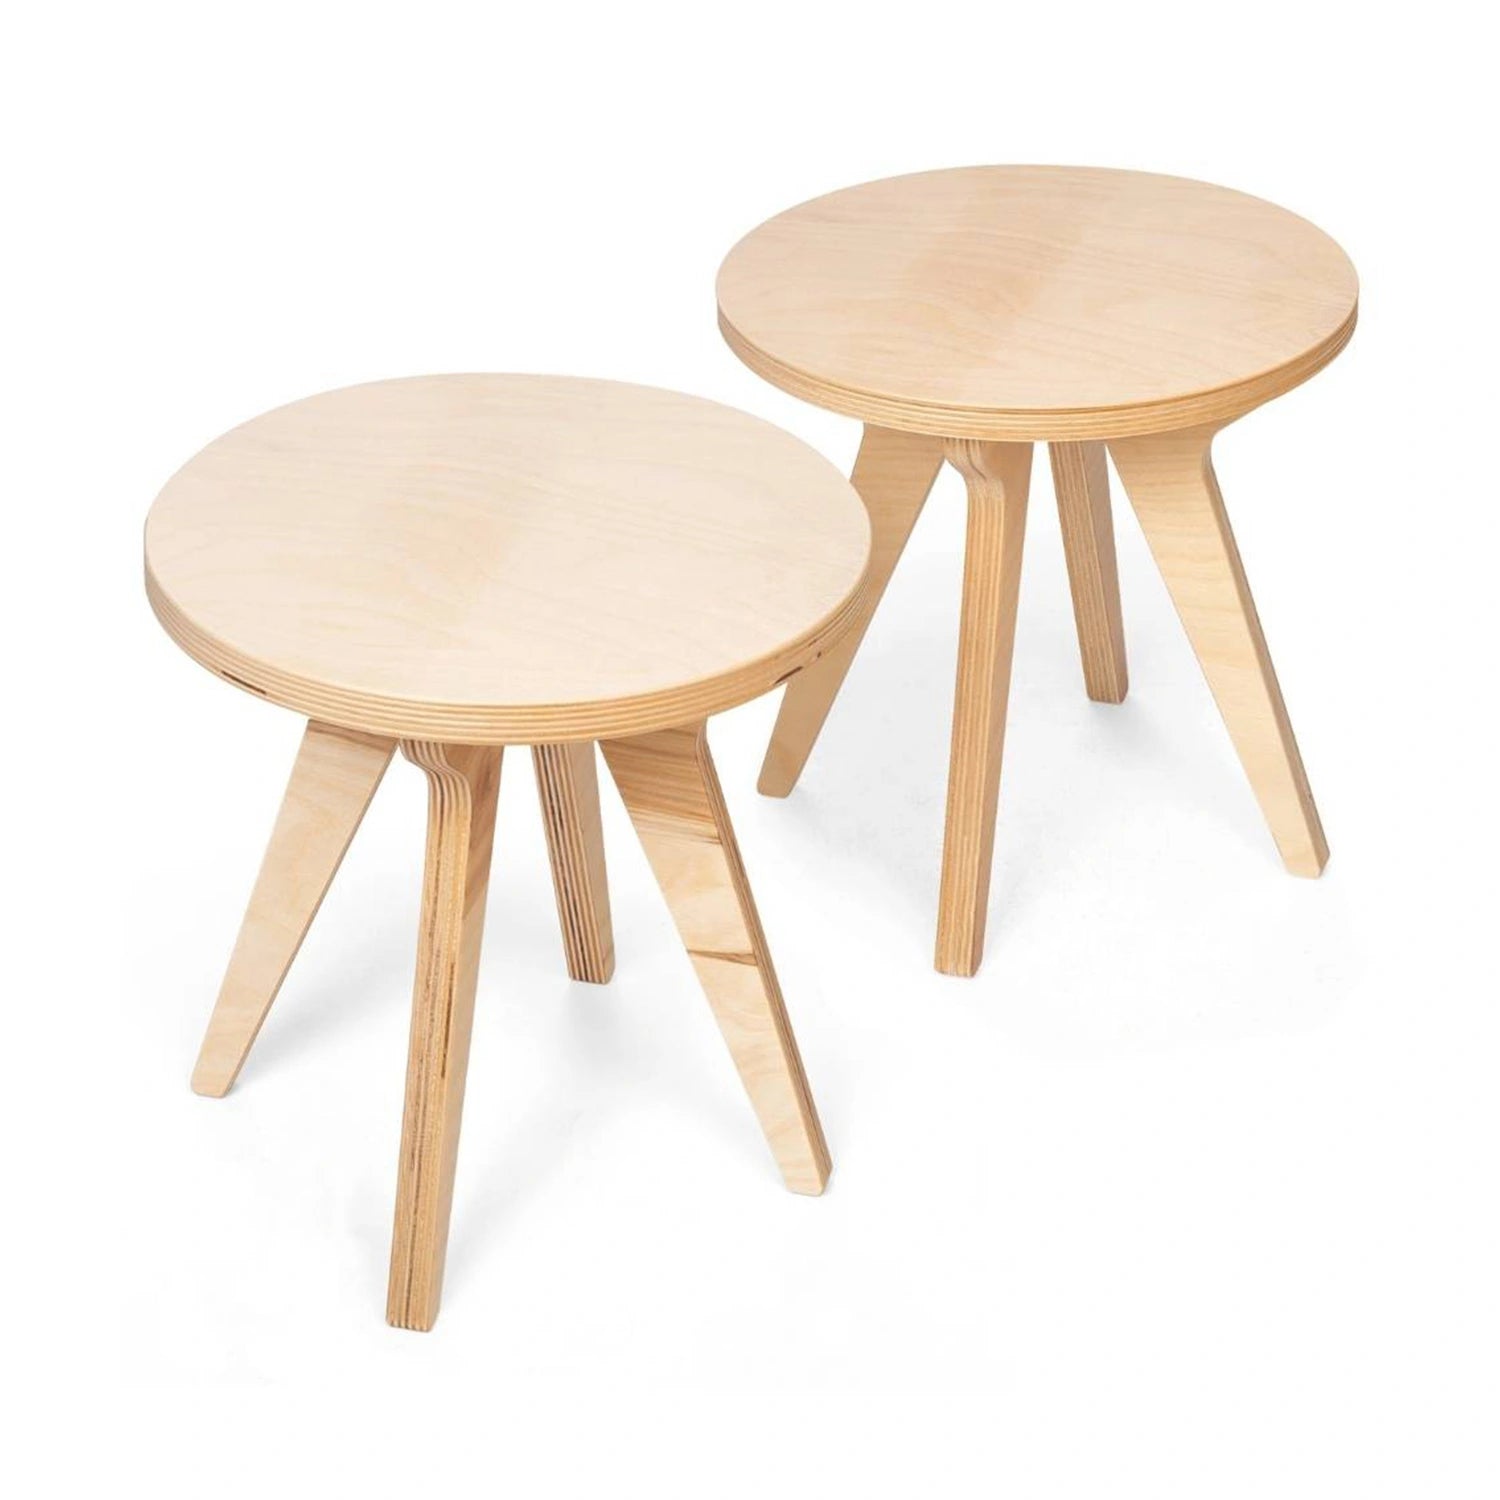 An image of Wooden Stools for Kids (Set of 2) - SmallSmartUK